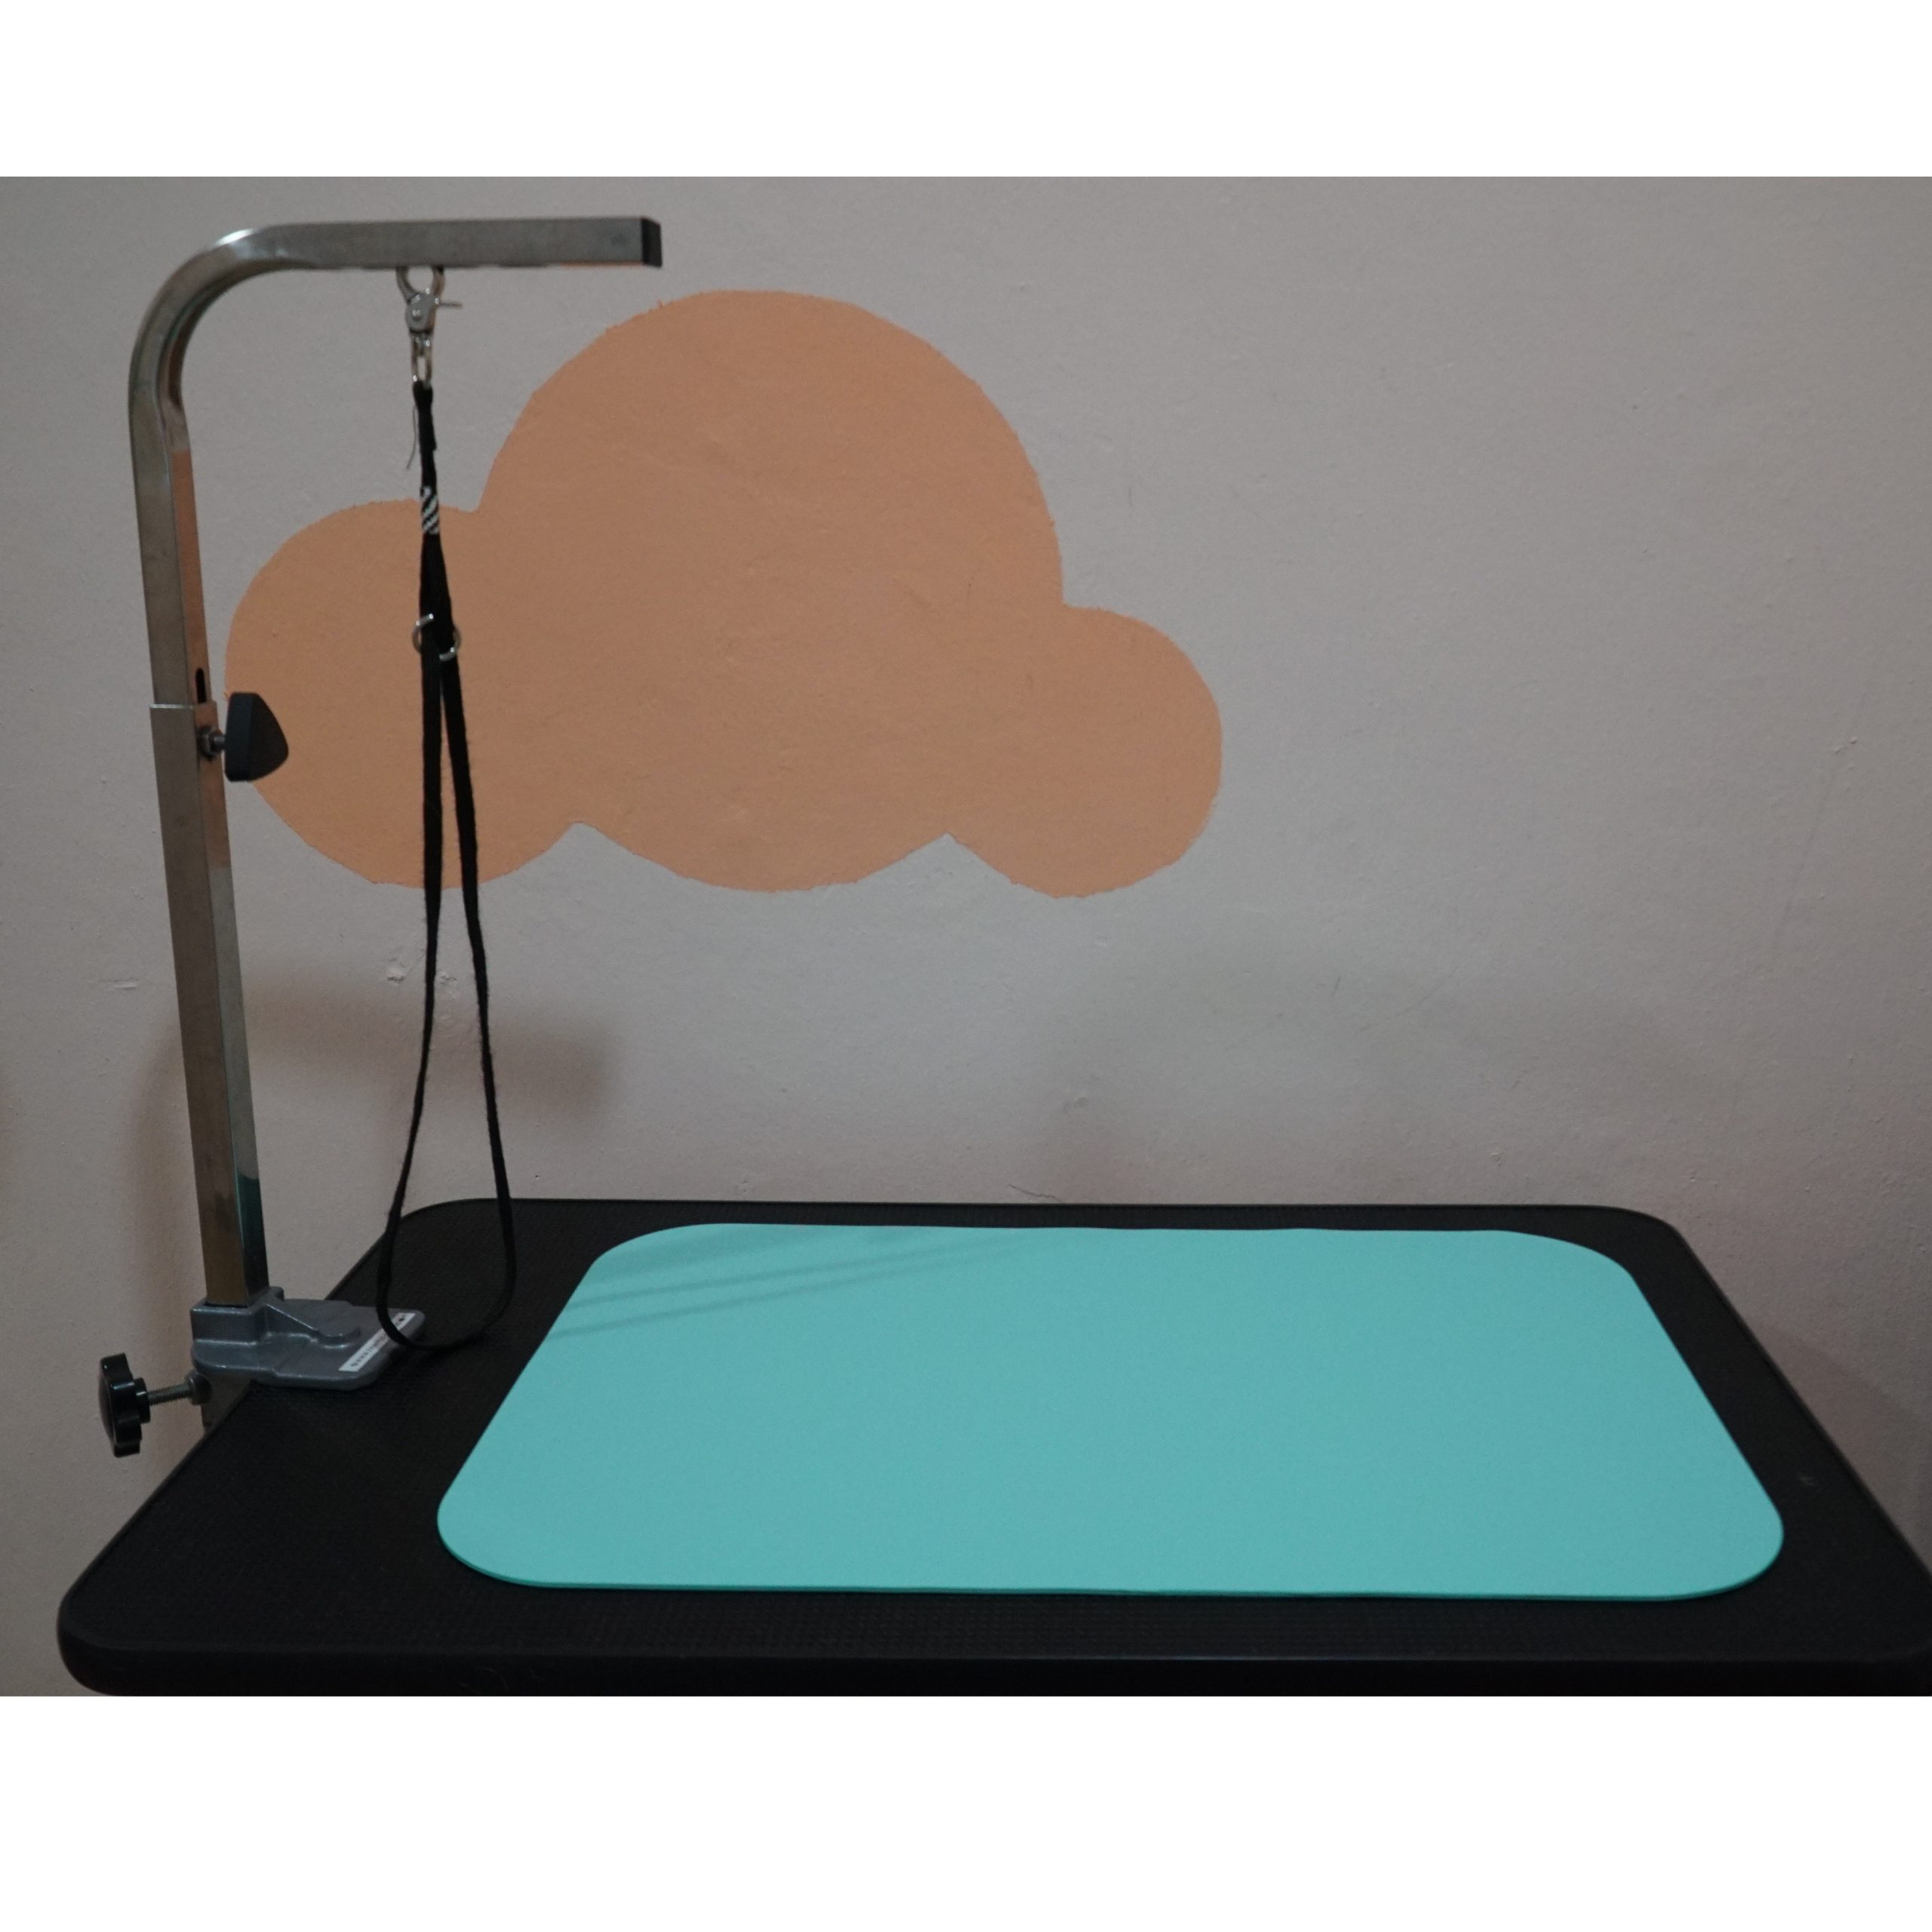 https://pawrus.com.sg/wp-content/uploads/2022/01/Pawrus%C2%AE-Pet-Grooming-Anti-Slip-Mat-on-Table-scaled.jpg